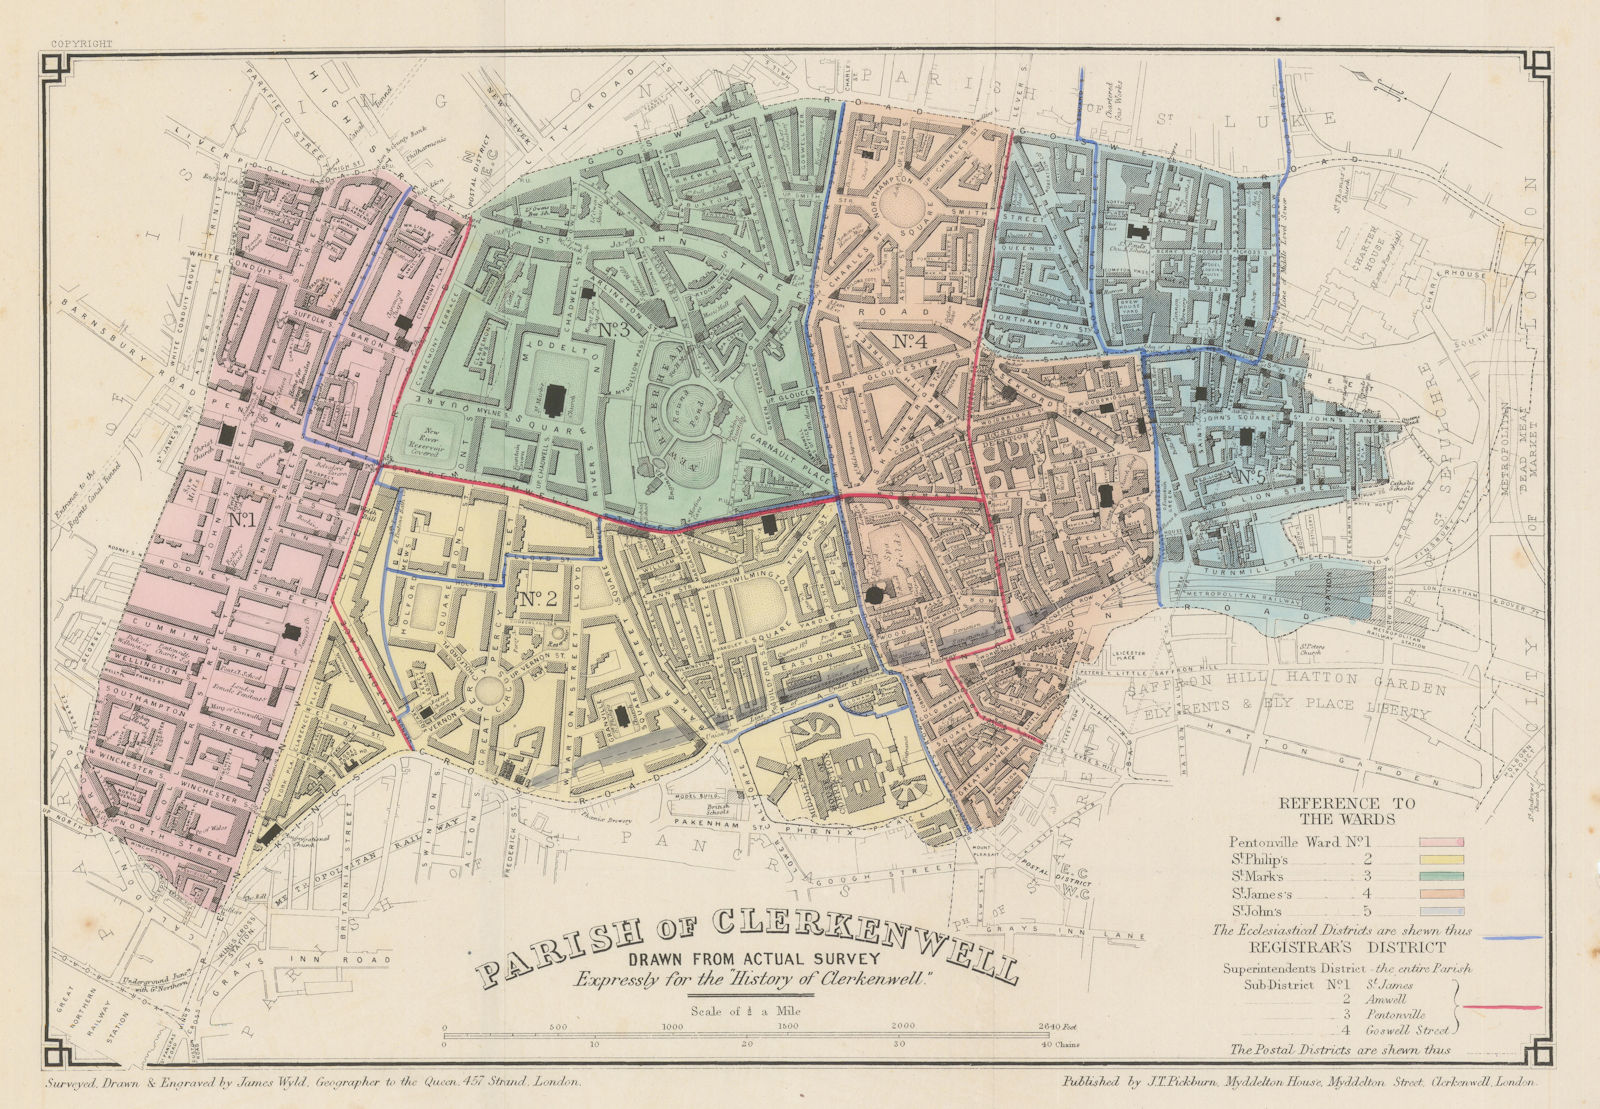 Parish of Clerkenwell, drawn from an actual survey, by James Wyld 1865 old map